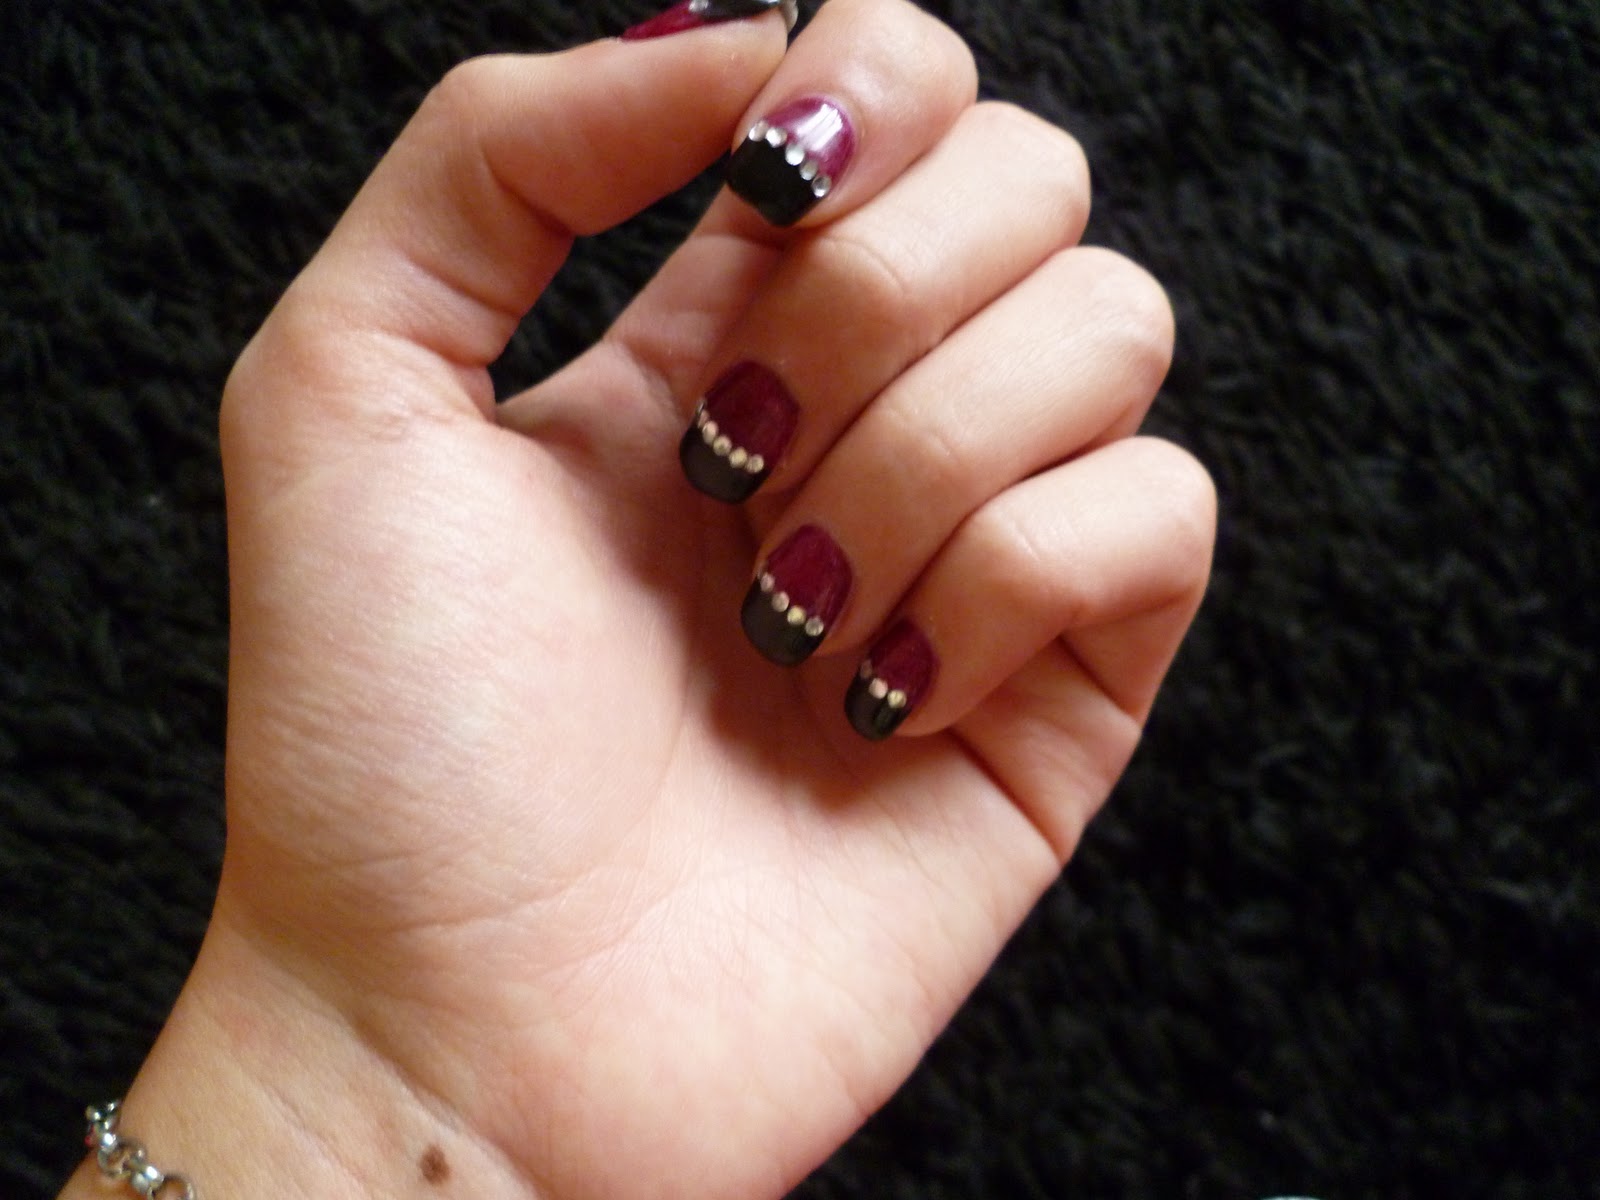 3. Autumn Nail Designs for November - wide 6